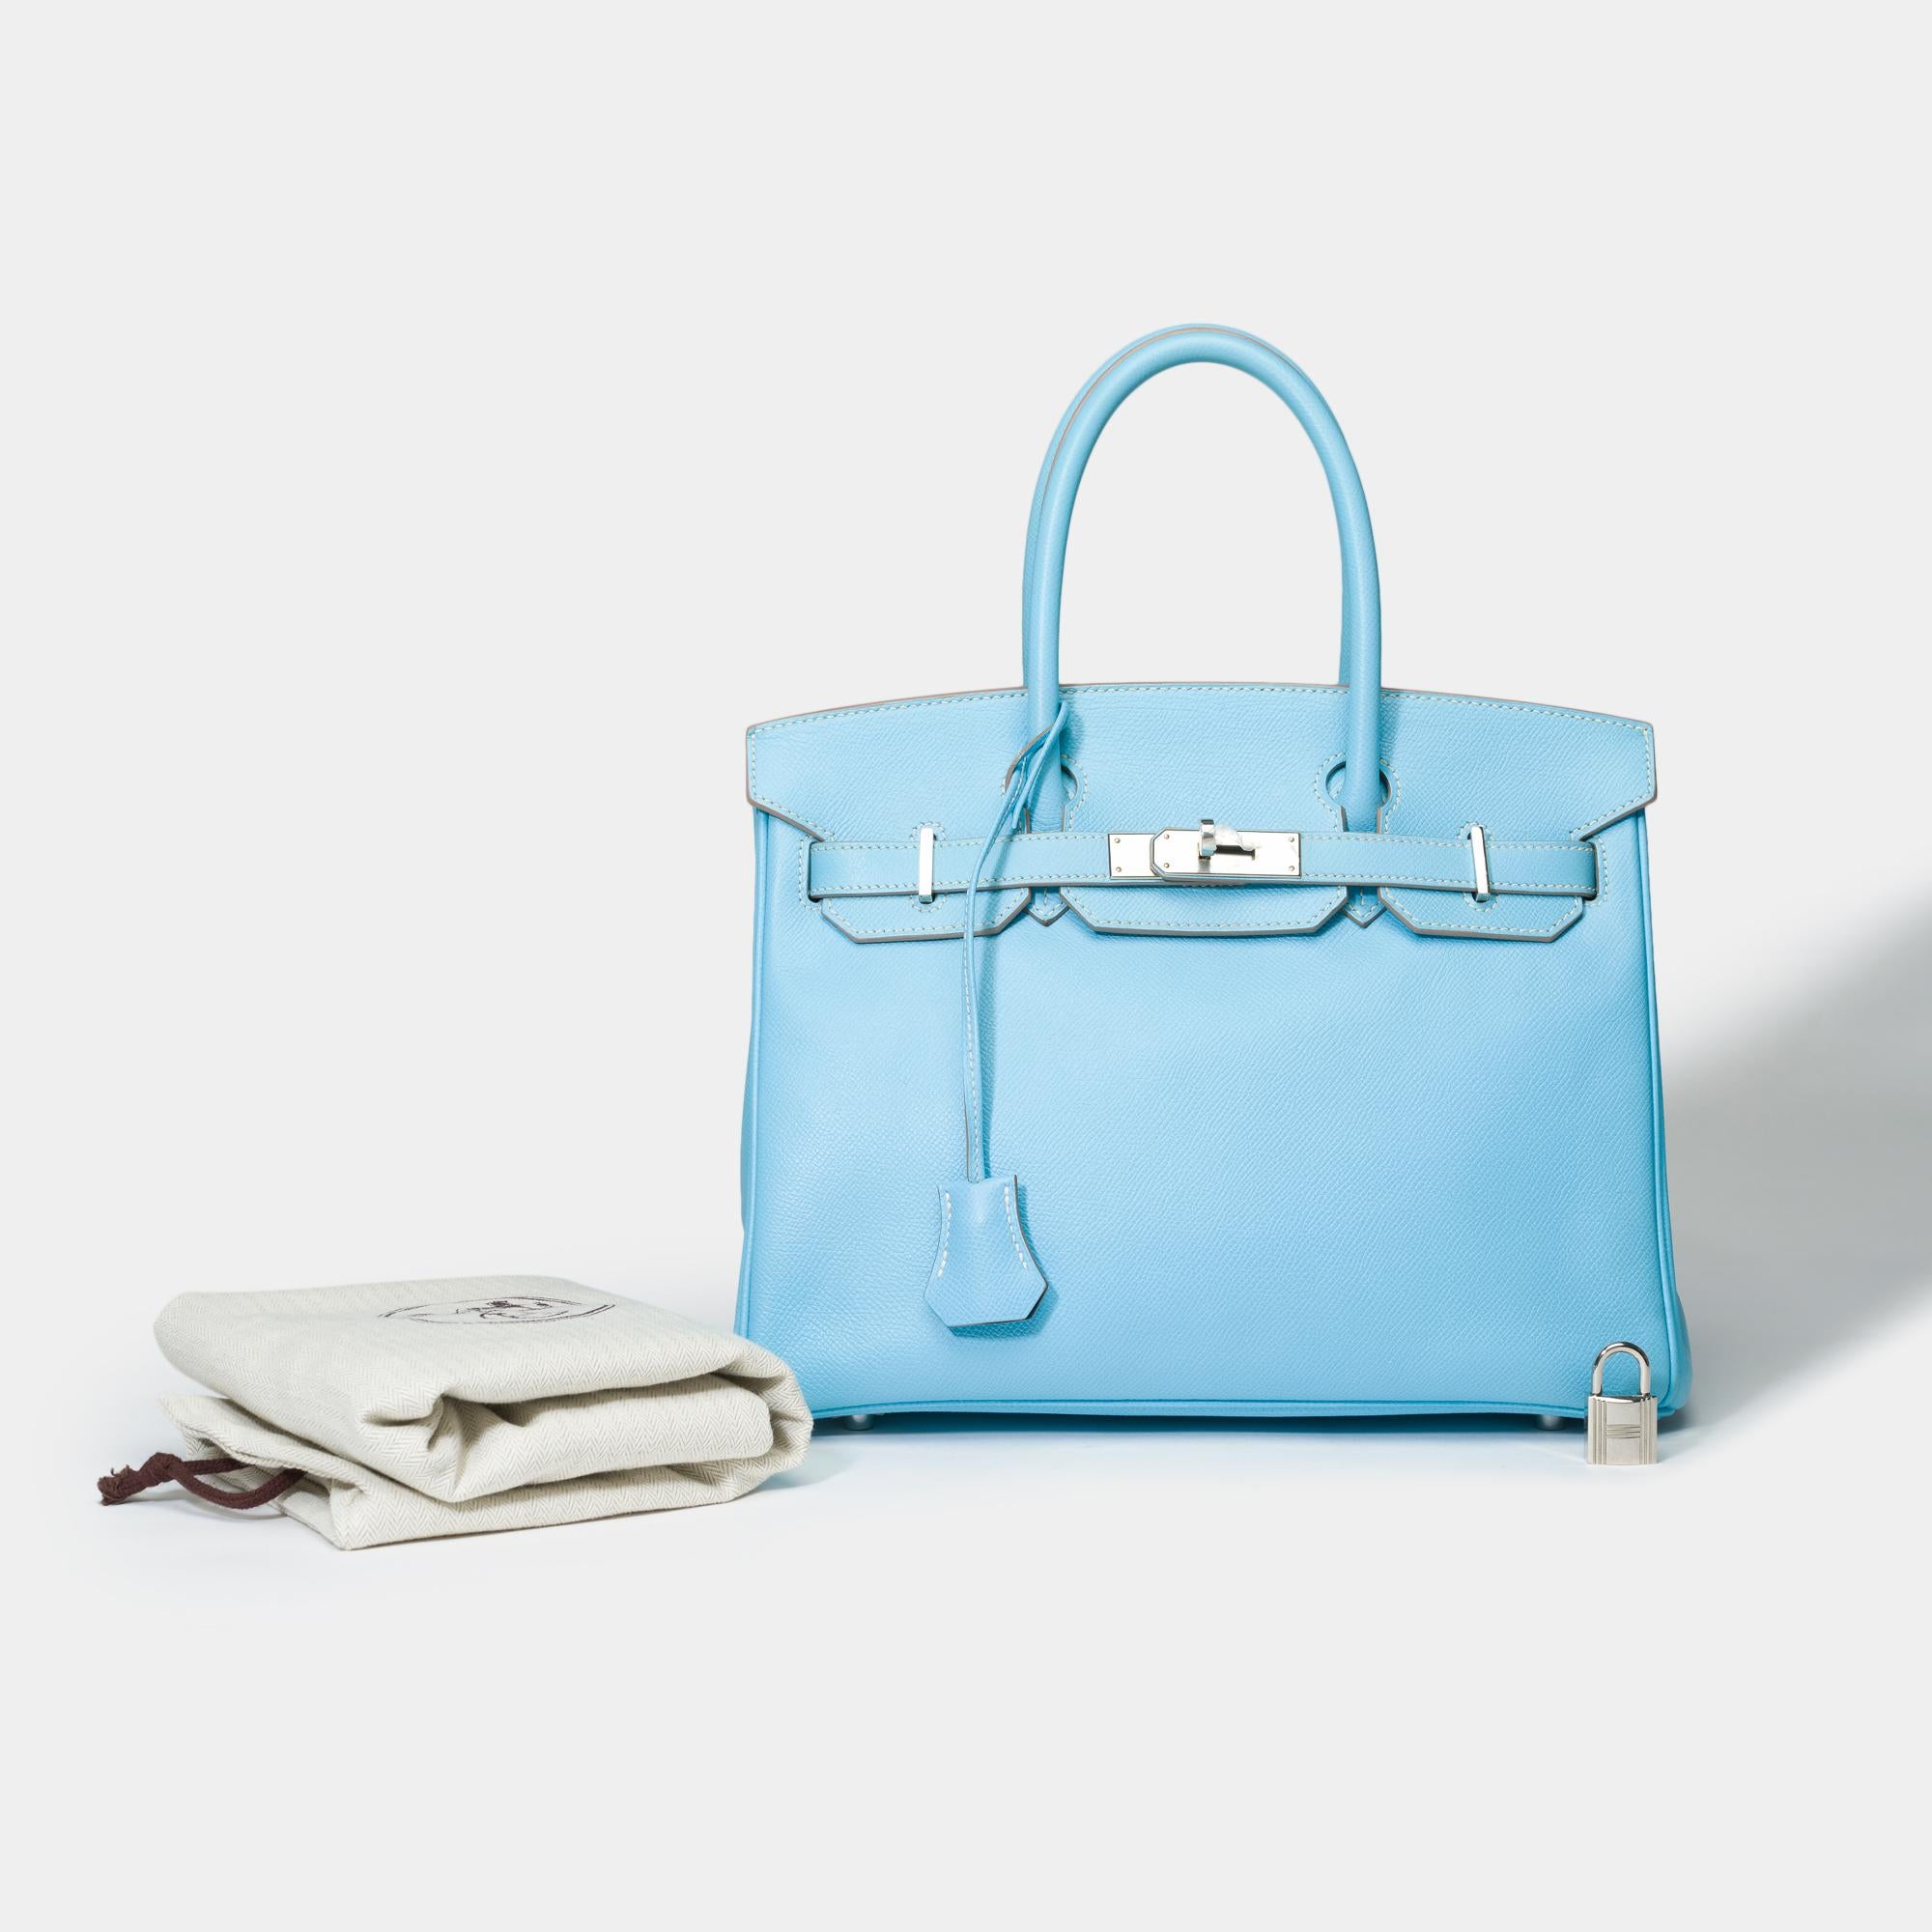 Exceptional​ ​Hermes​ ​Birkin​ ​30​ ​Limited​ ​Edition​ ​Candy​ ​Collection​ ​in​ ​Celeste​ ​Blue​ ​in​ ​Epsom​ ​leather​ ​with​ ​white​ ​stitching​ ​and​ ​Mykonos​ ​blue​ ​leather​ ​interior,​ ​palladium​ ​silver​ ​metal​ ​trim,​ ​double​ ​blue​